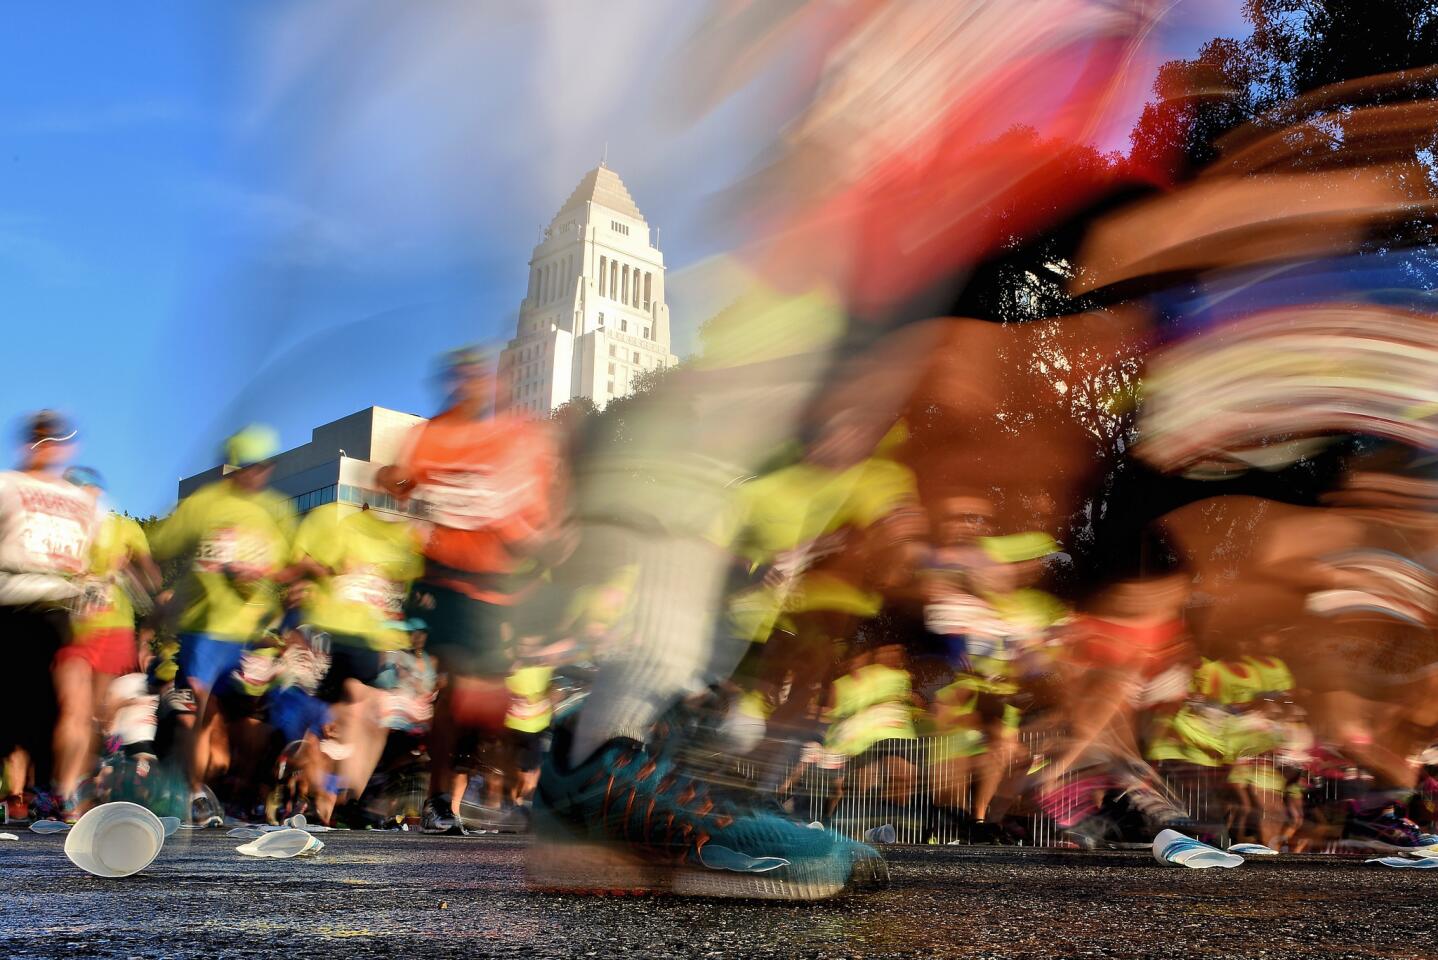 LOS ANGELES, CA - FEBRUARY 14: Participants run near Los Angeles City Hall during the 2016 Skechers Performance Los Angeles Marathon on February 14, 2016 in Los Angeles, California. (Photo by Jonathan Moore/Getty Images) ** OUTS - ELSENT, FPG, CM - OUTS * NM, PH, VA if sourced by CT, LA or MoD **